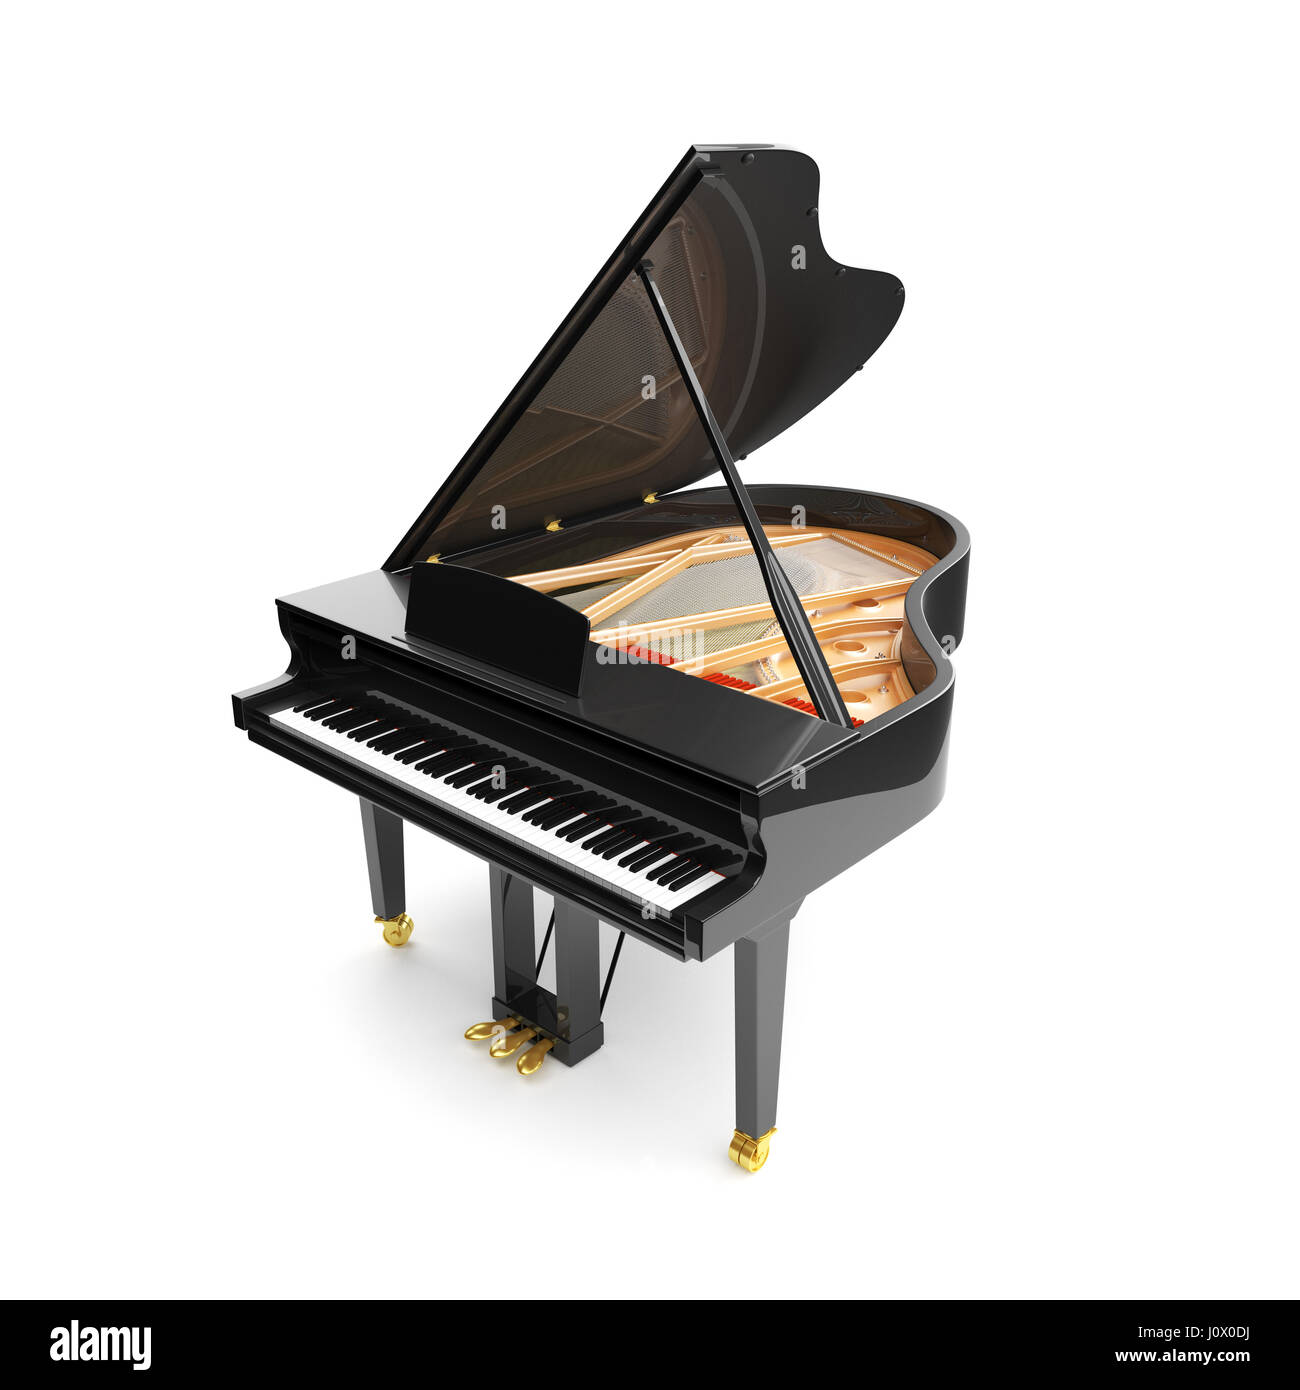 Grand piano isolated on the white background. Stock Photo